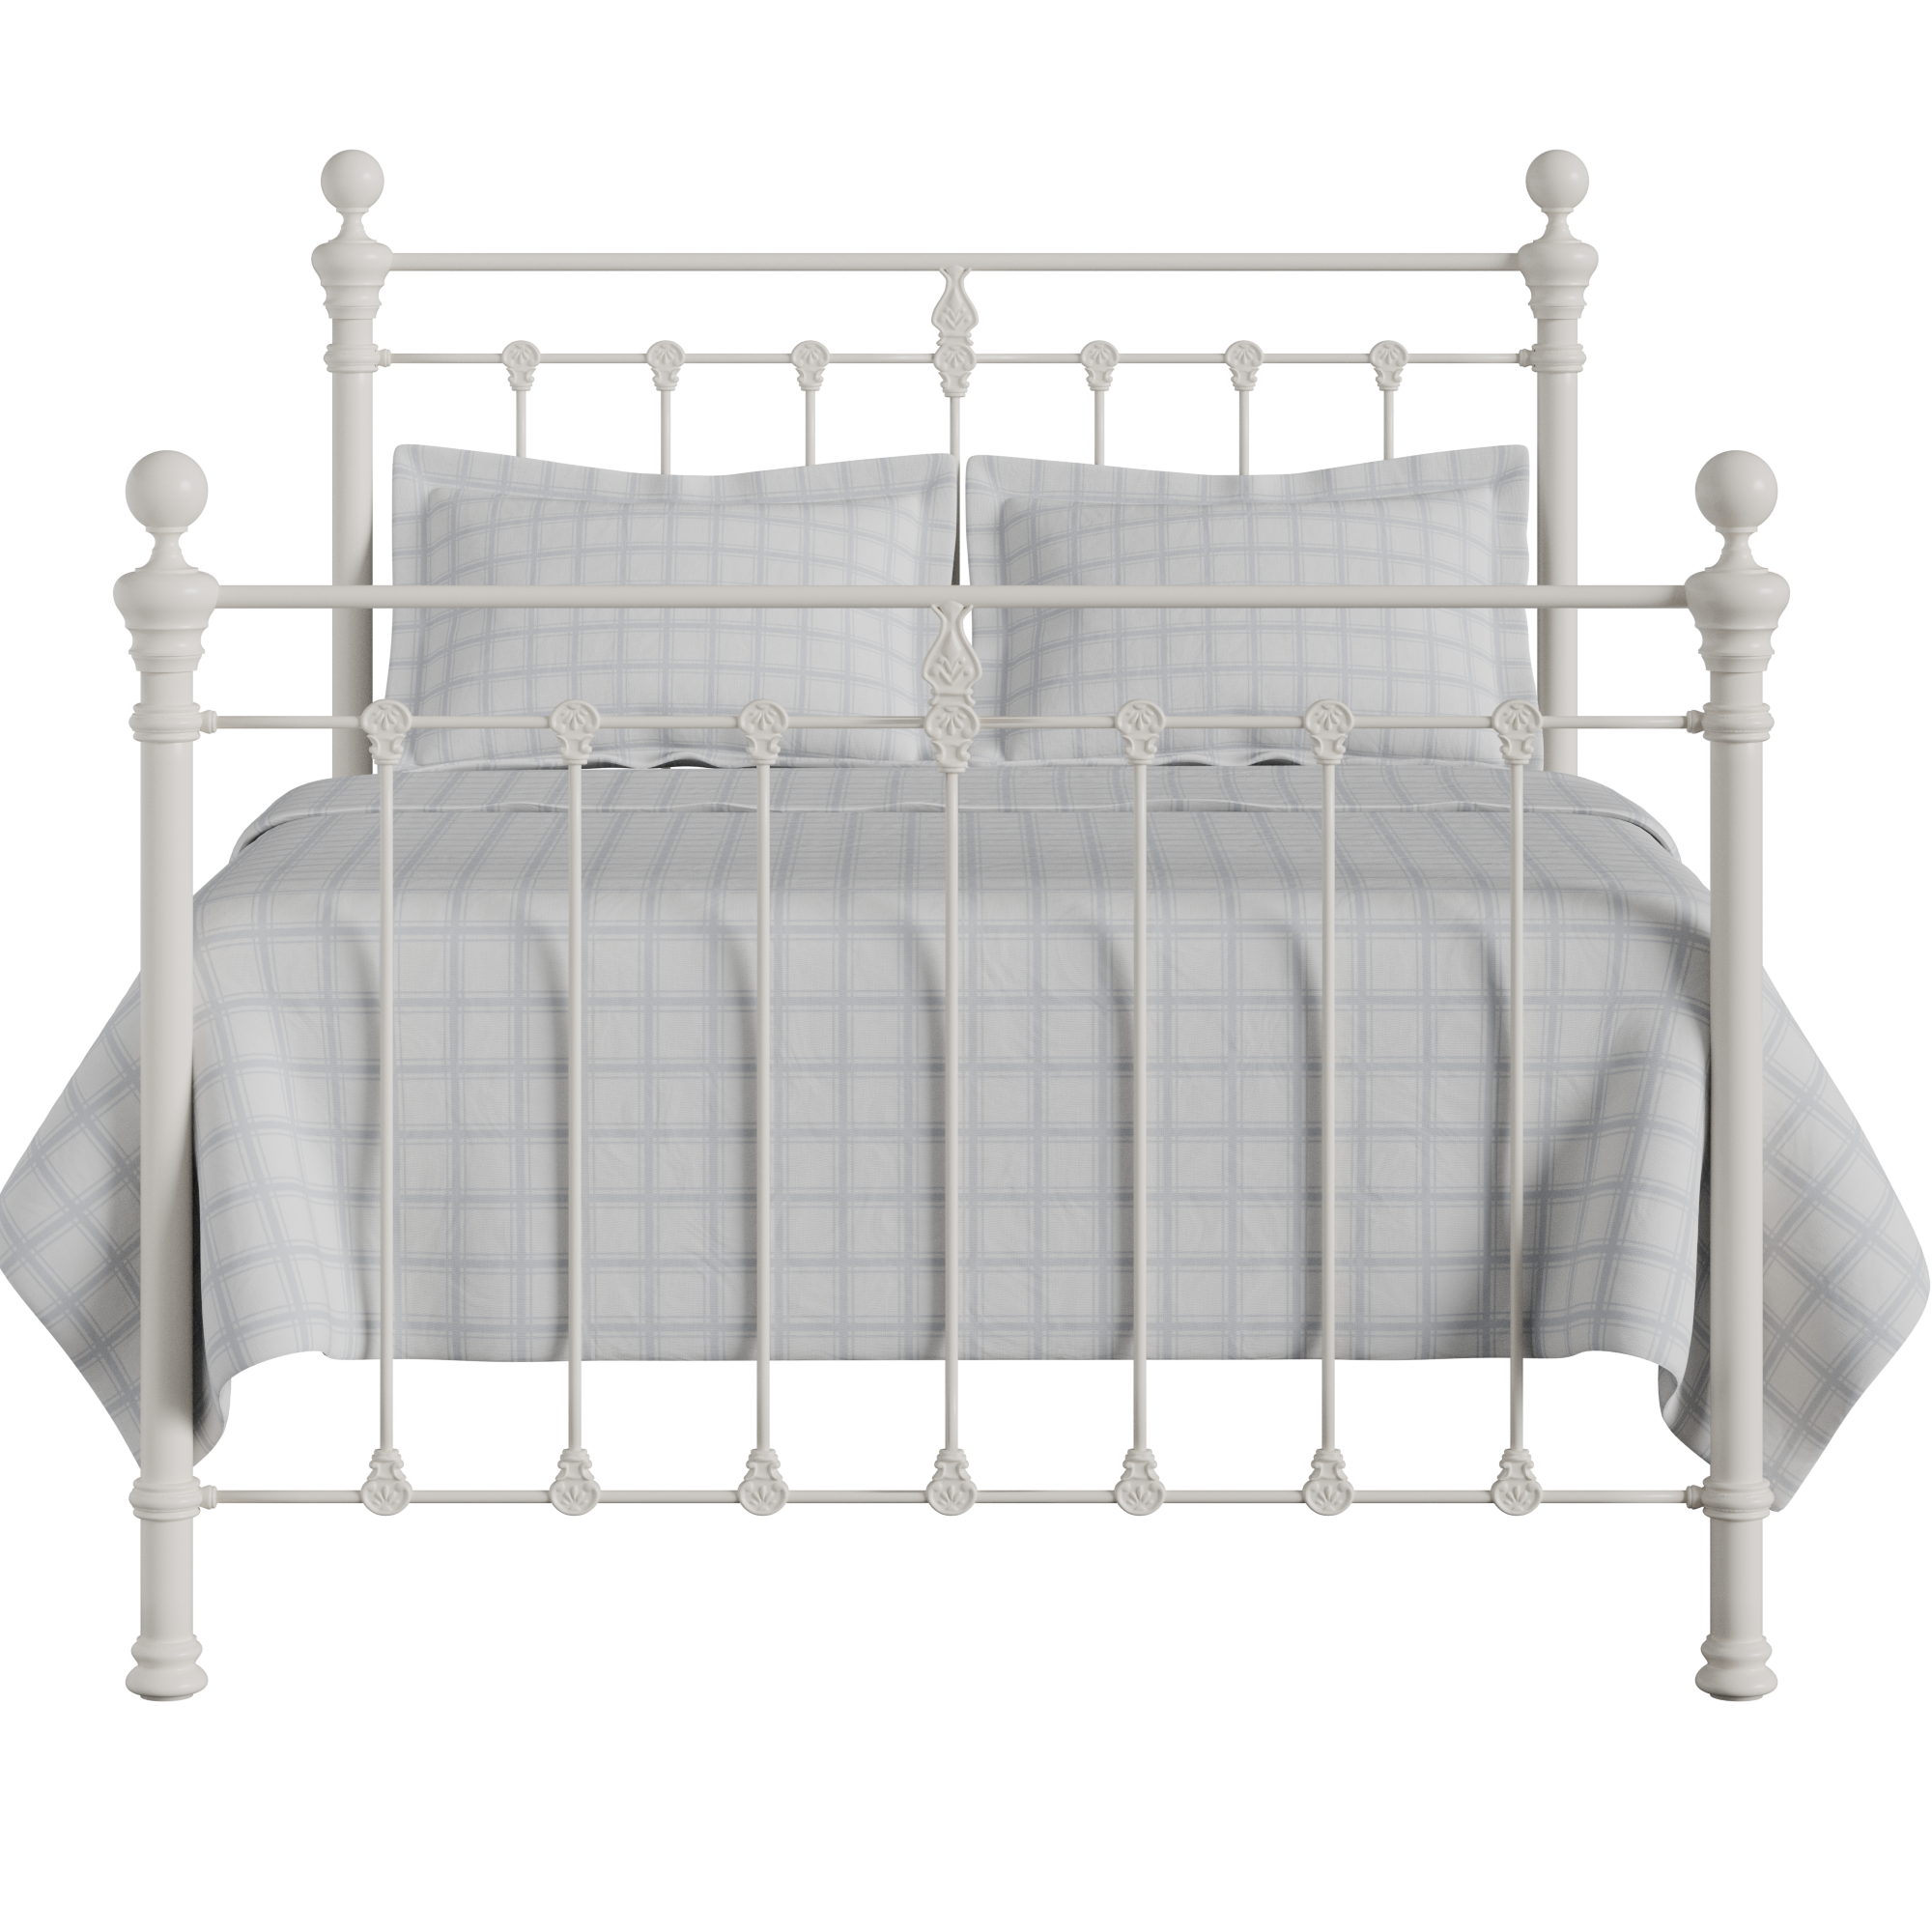 Hamilton Solo iron/metal bed in ivory